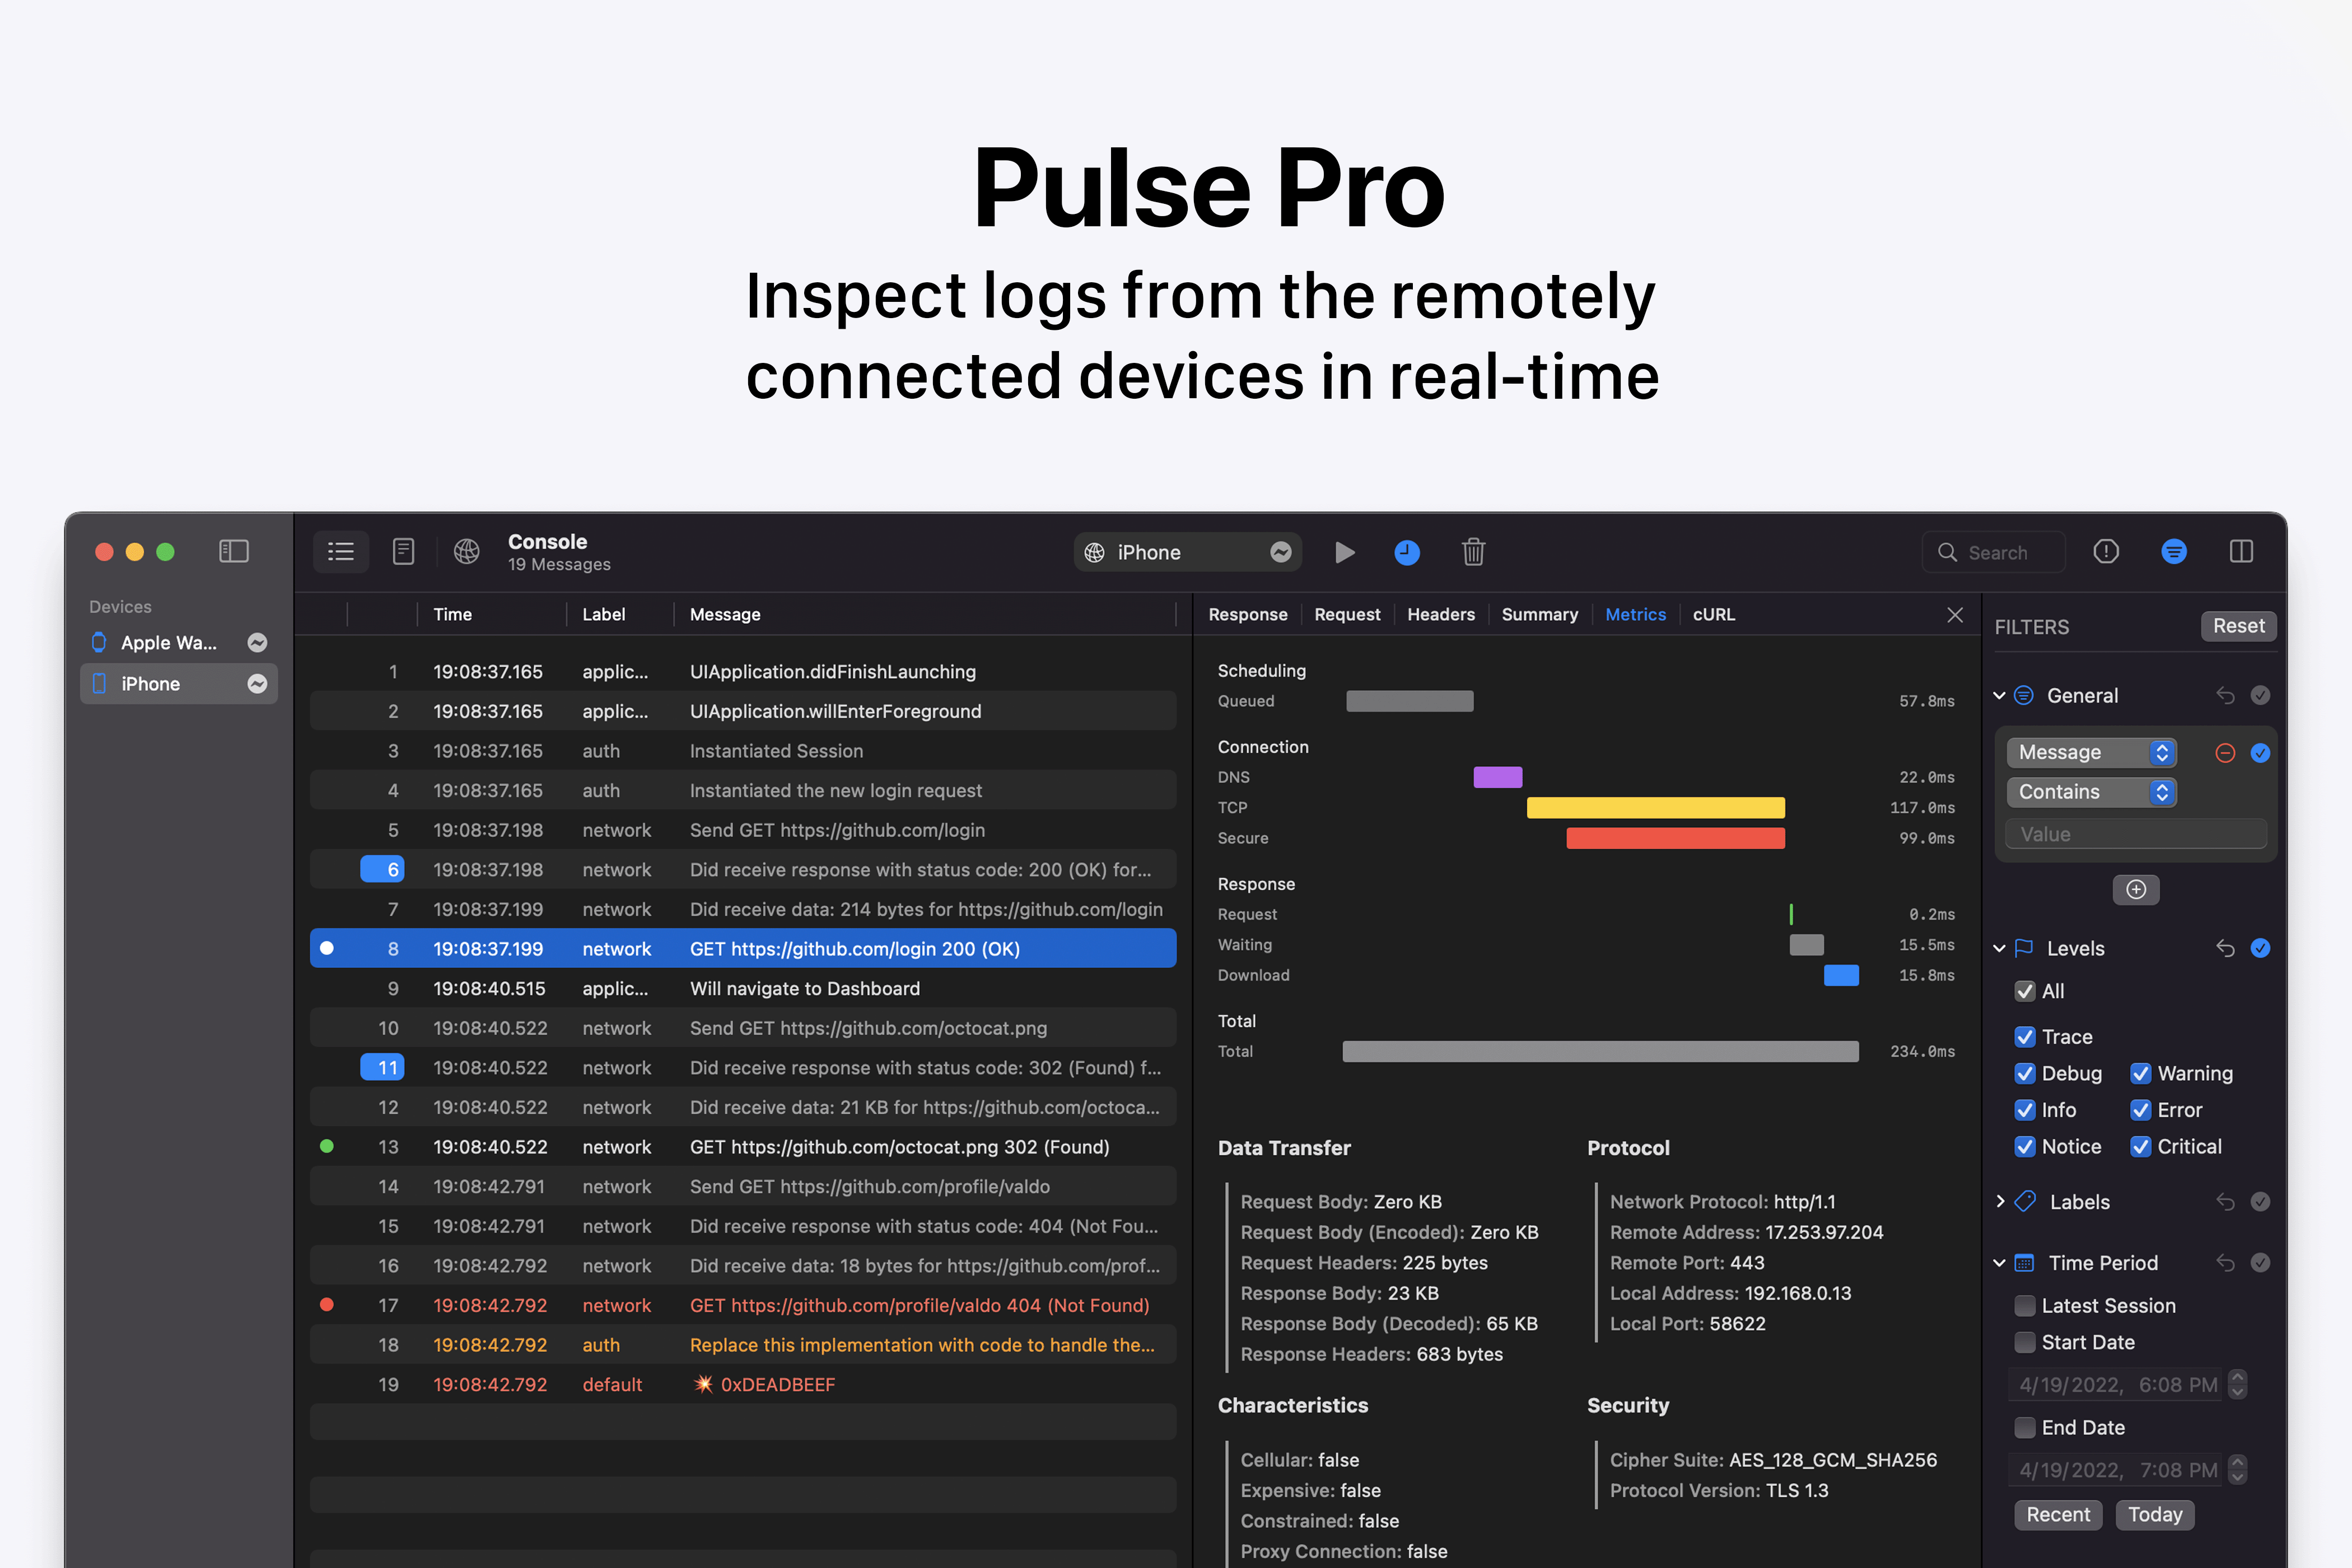 Pulse, a structured logging system built using SwiftUI